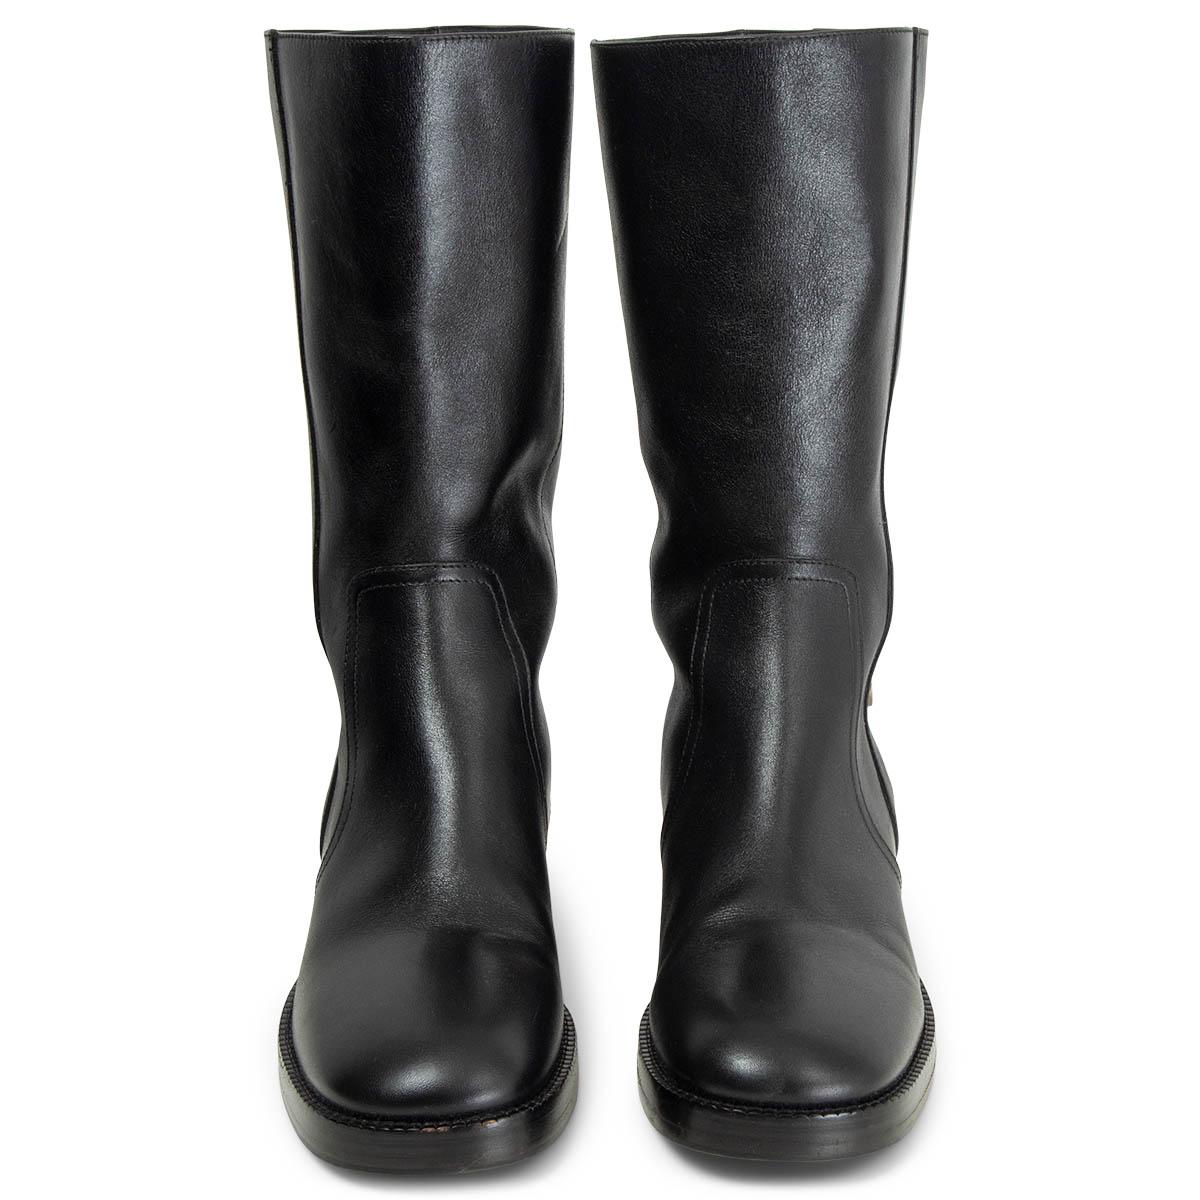 100% authentic Christian Dior Diorodeo smooth black leather riding boots featuring a scalopped edge that opens with antique silver-tone push-buttons along the calf. Have been worn once and are in virtually new condition. Come with dust bags. 

2019